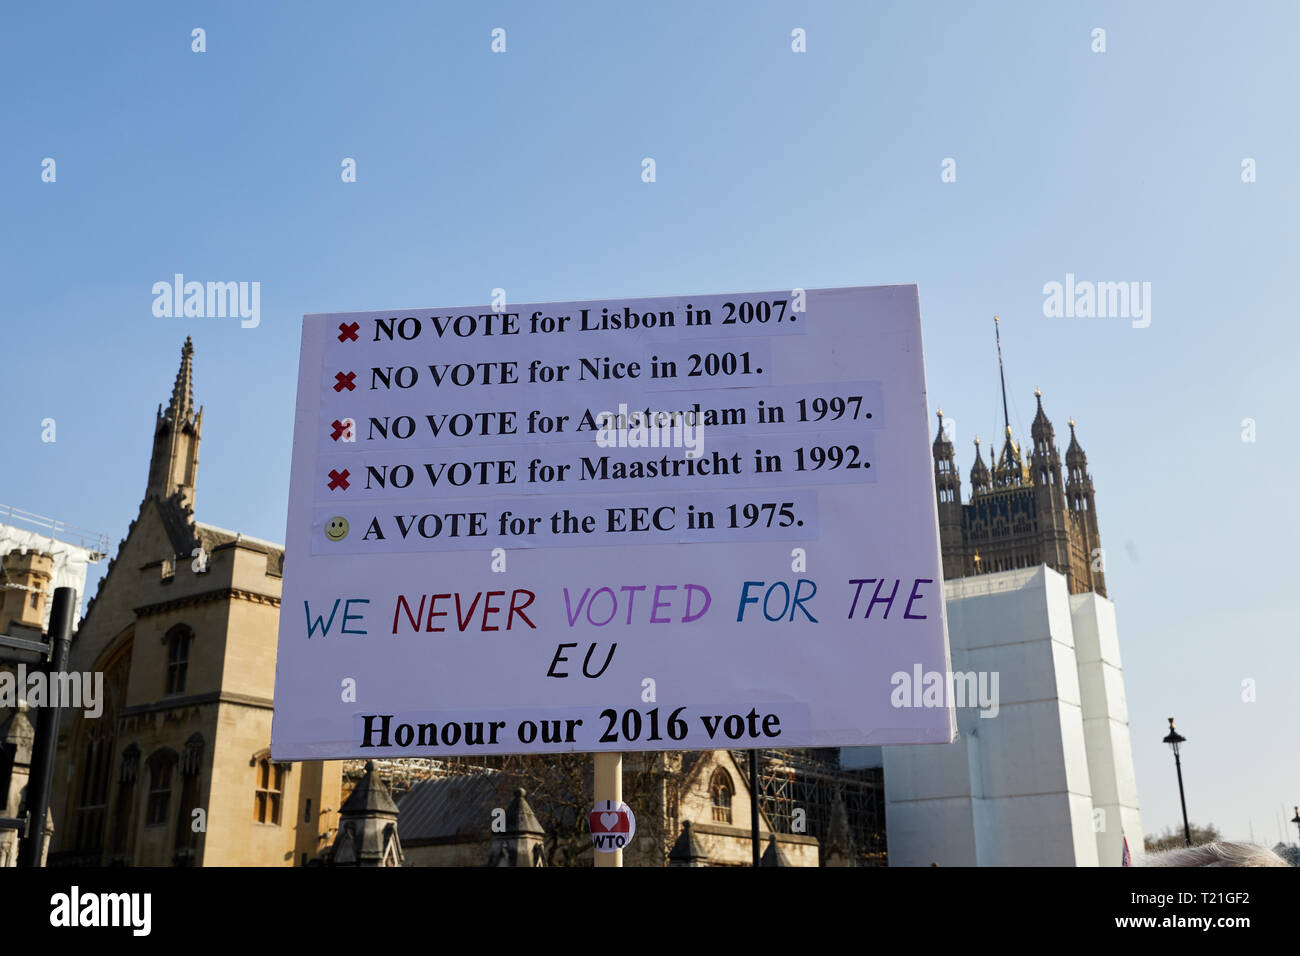 London, UK. - March 29, 2019: A placard held aloft at a demonstration in Parliament Square on the day the UK should have left the EU. Credit: Kevin J. Frost/Alamy Live News Stock Photo